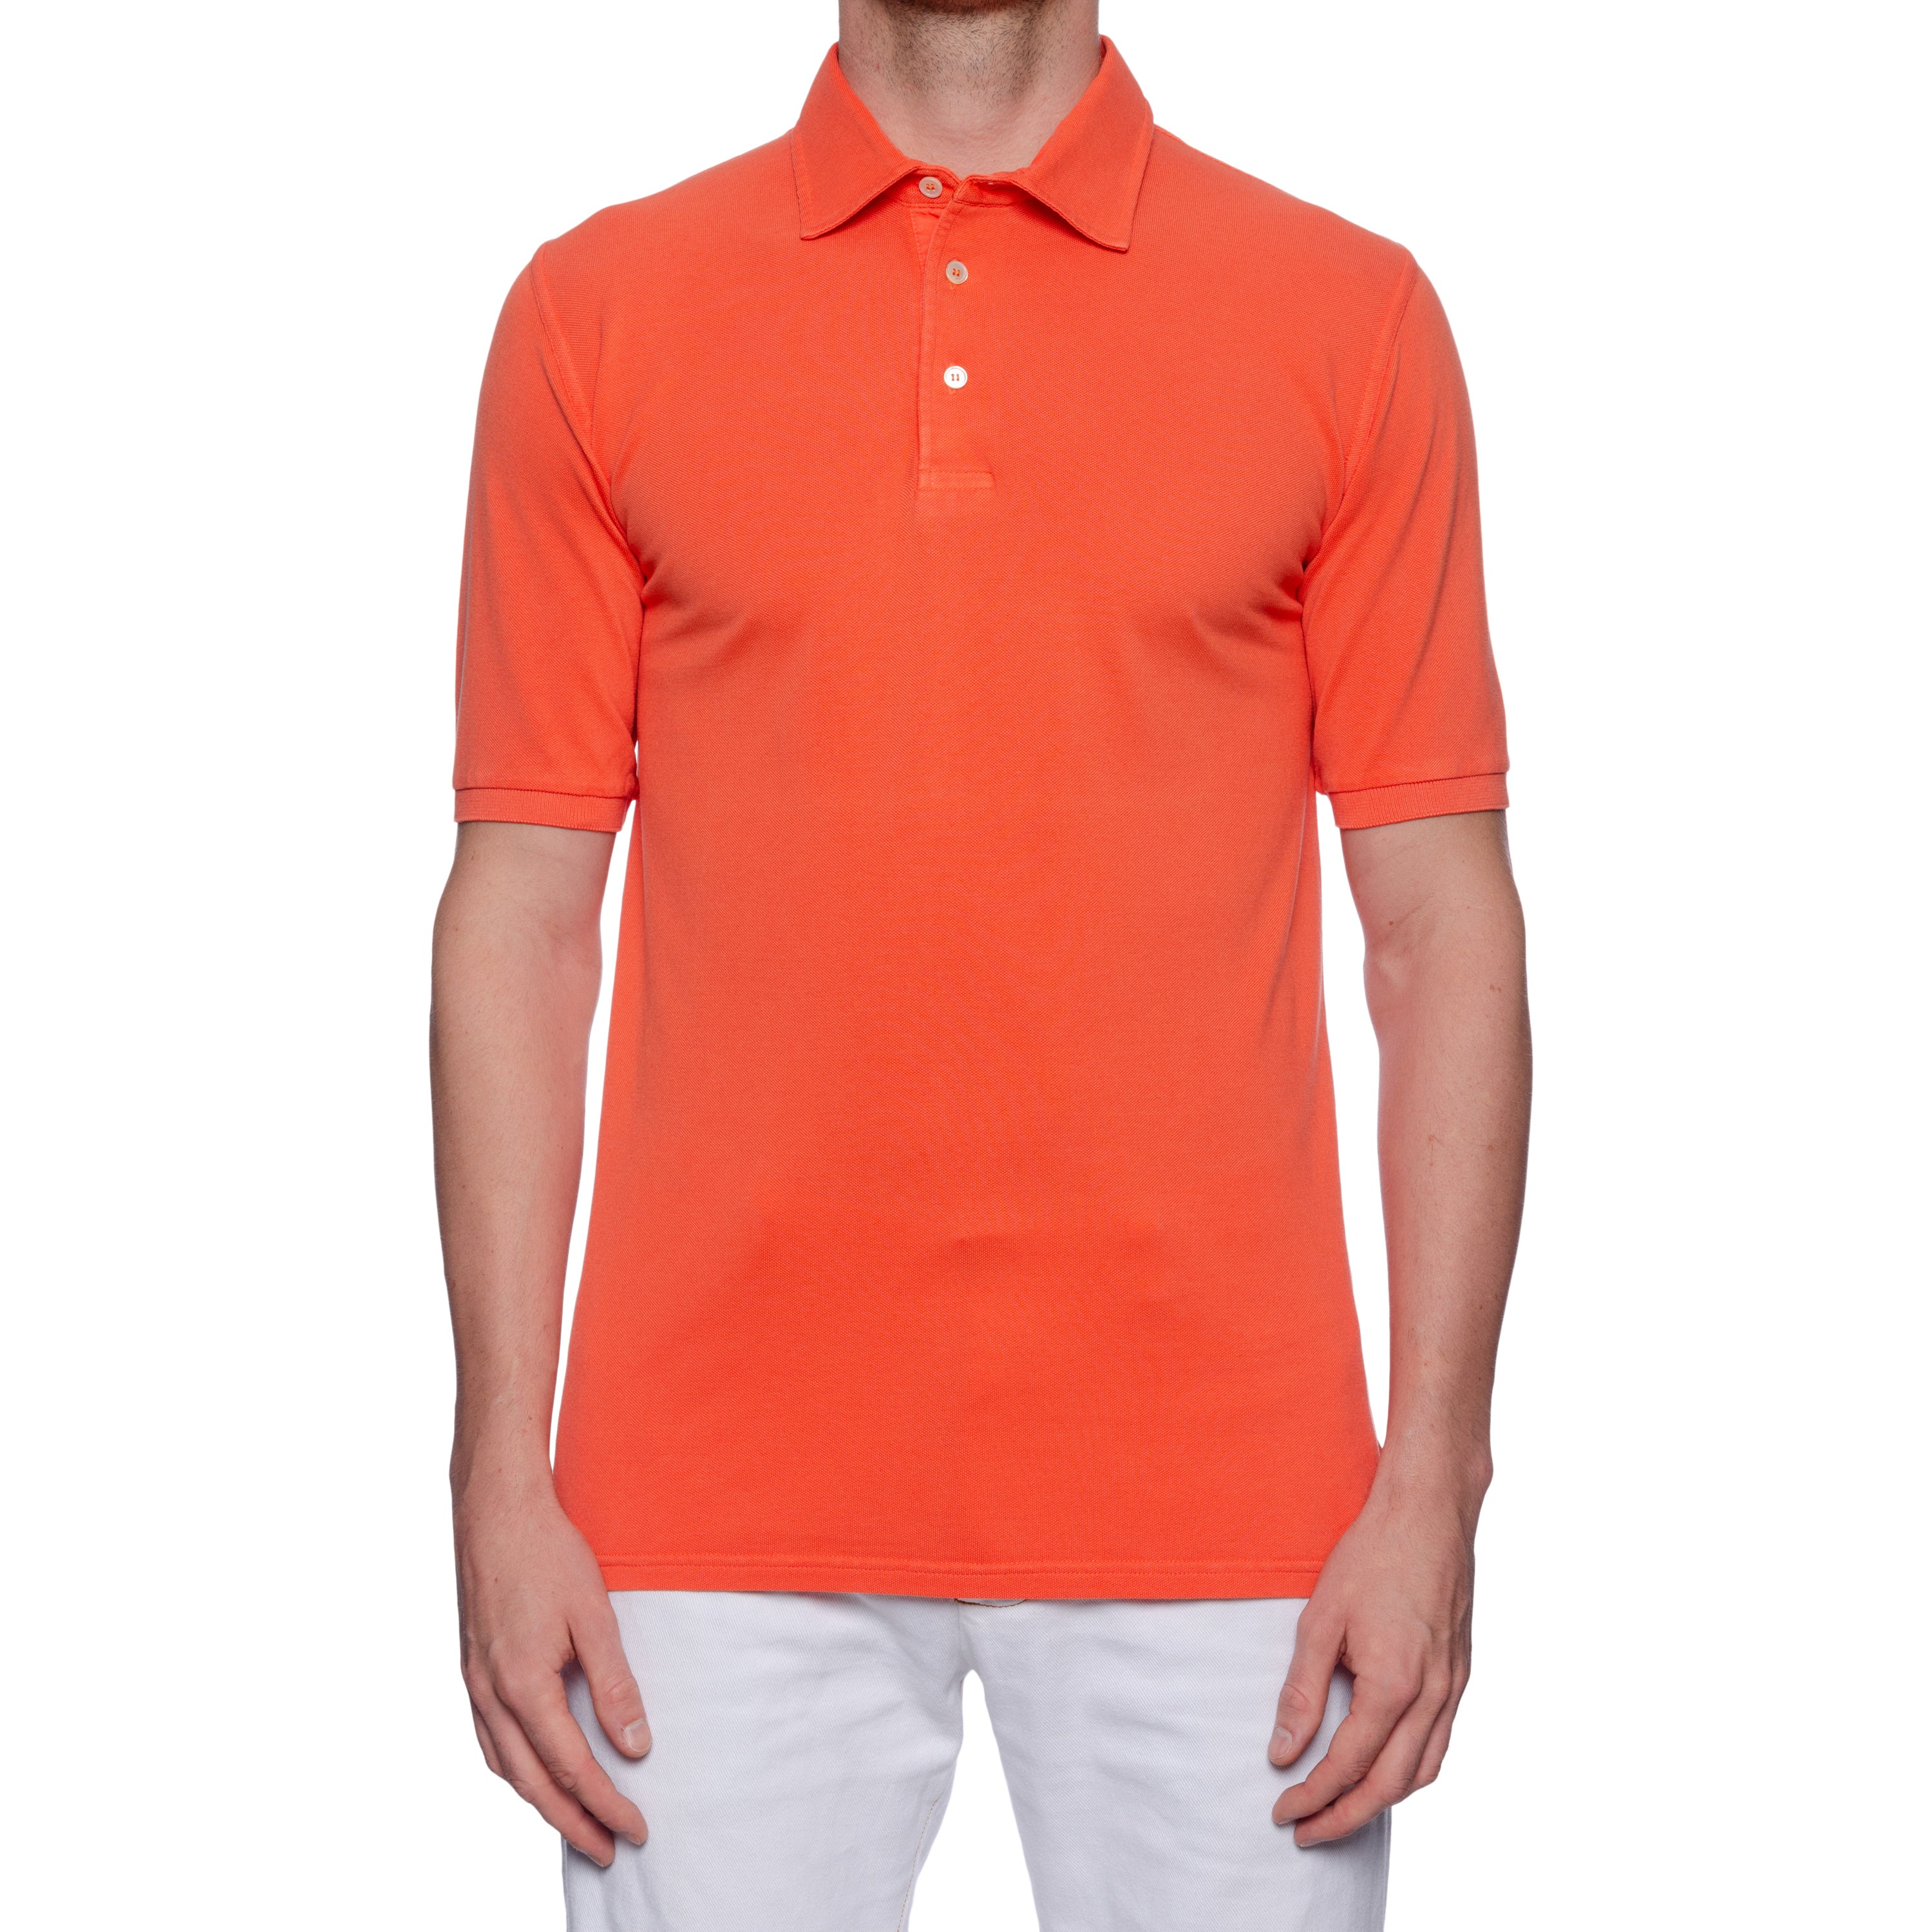 FEDELI "North" Coral Cotton Pique Frosted Short Sleeve Polo Shirt 50 NEW US M